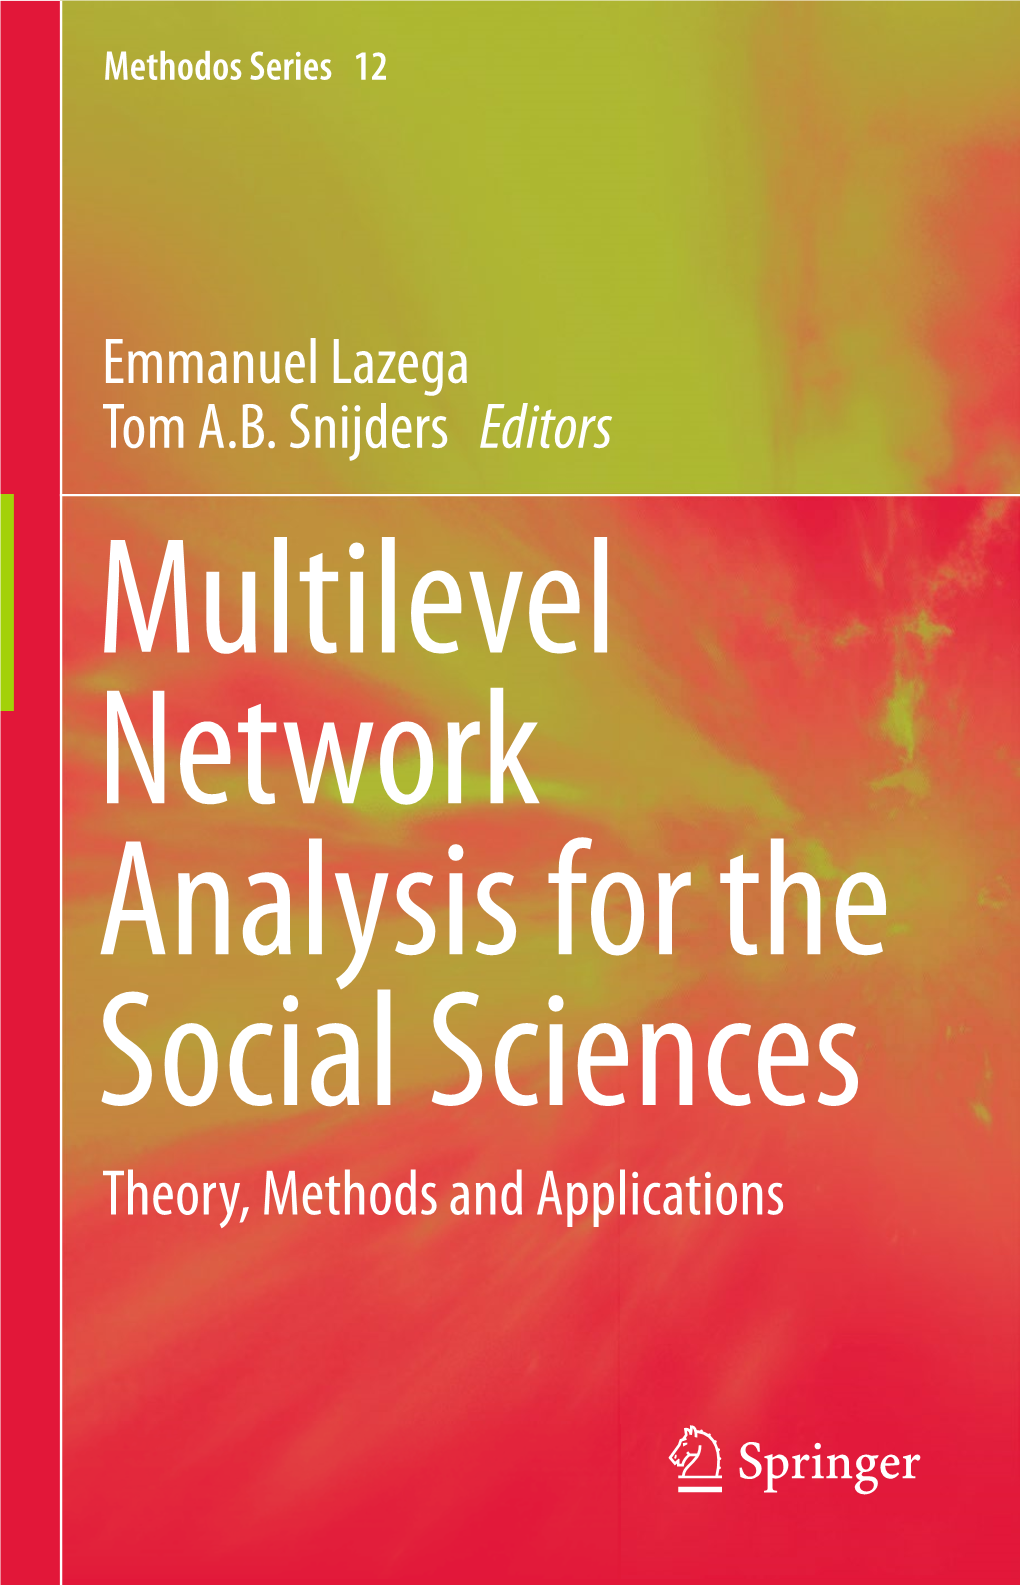 A Multilevel Network Analysis